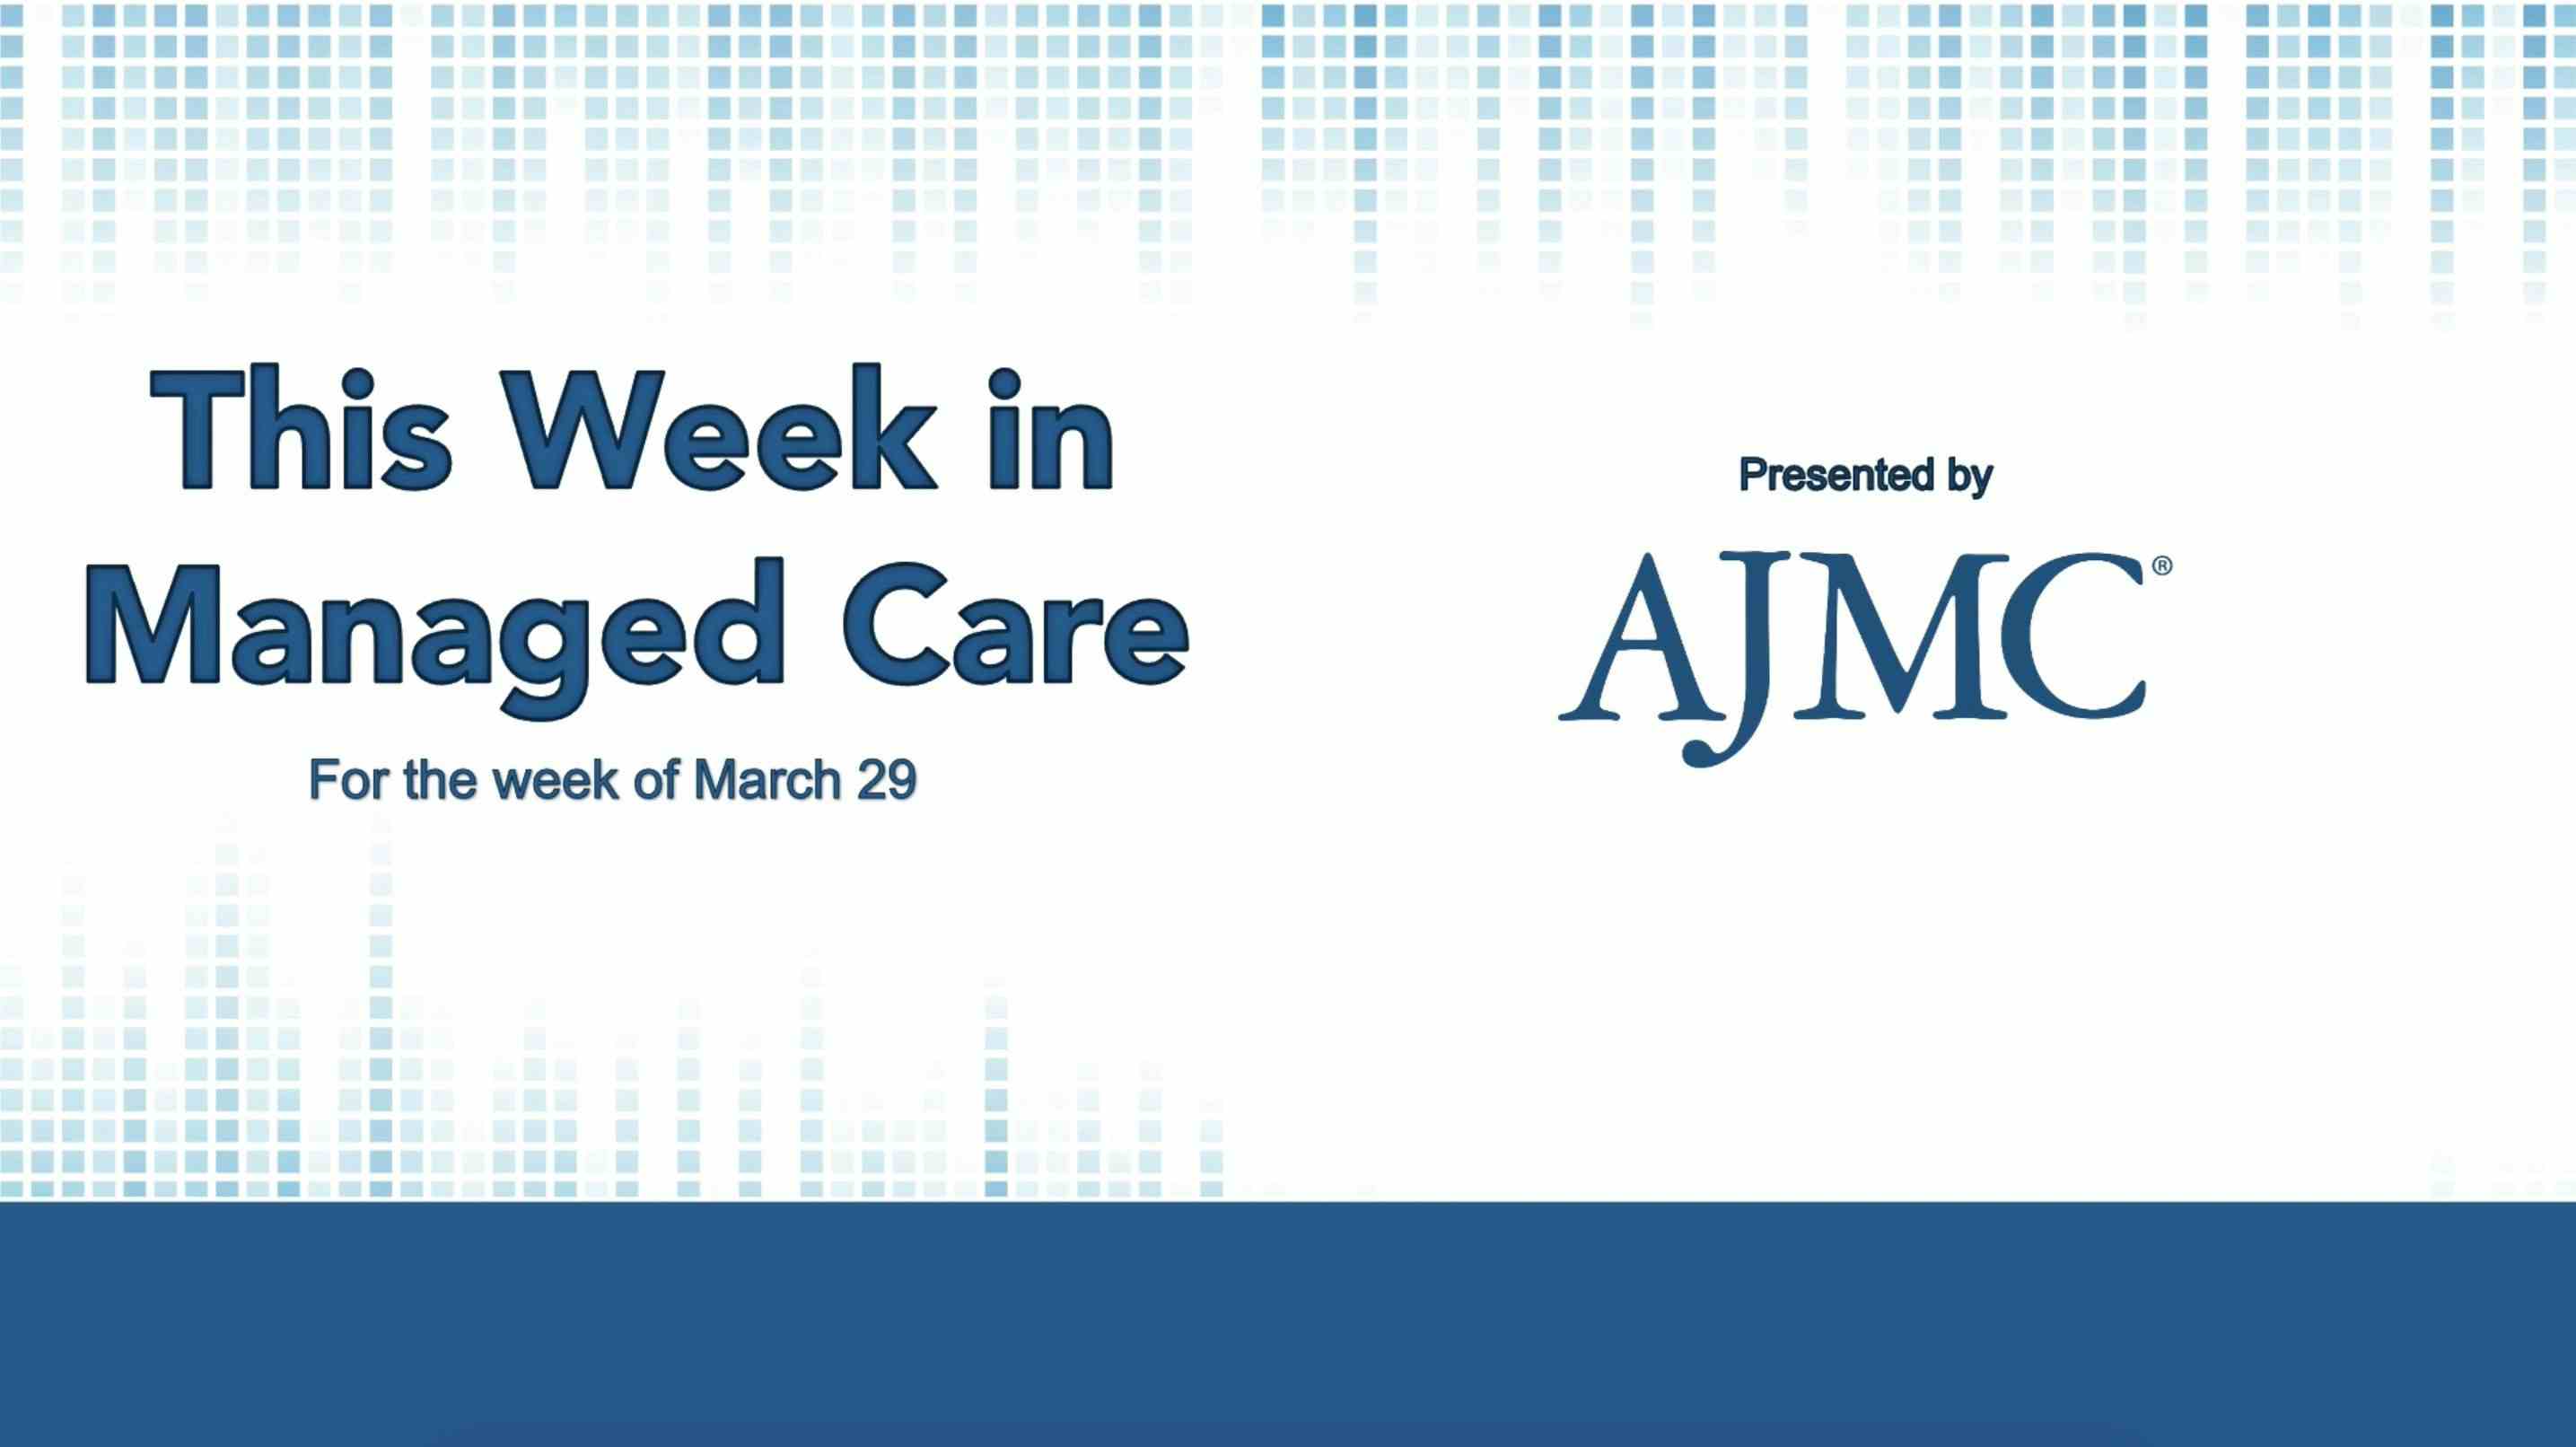 This Week in Managed Care: April 2, 2021